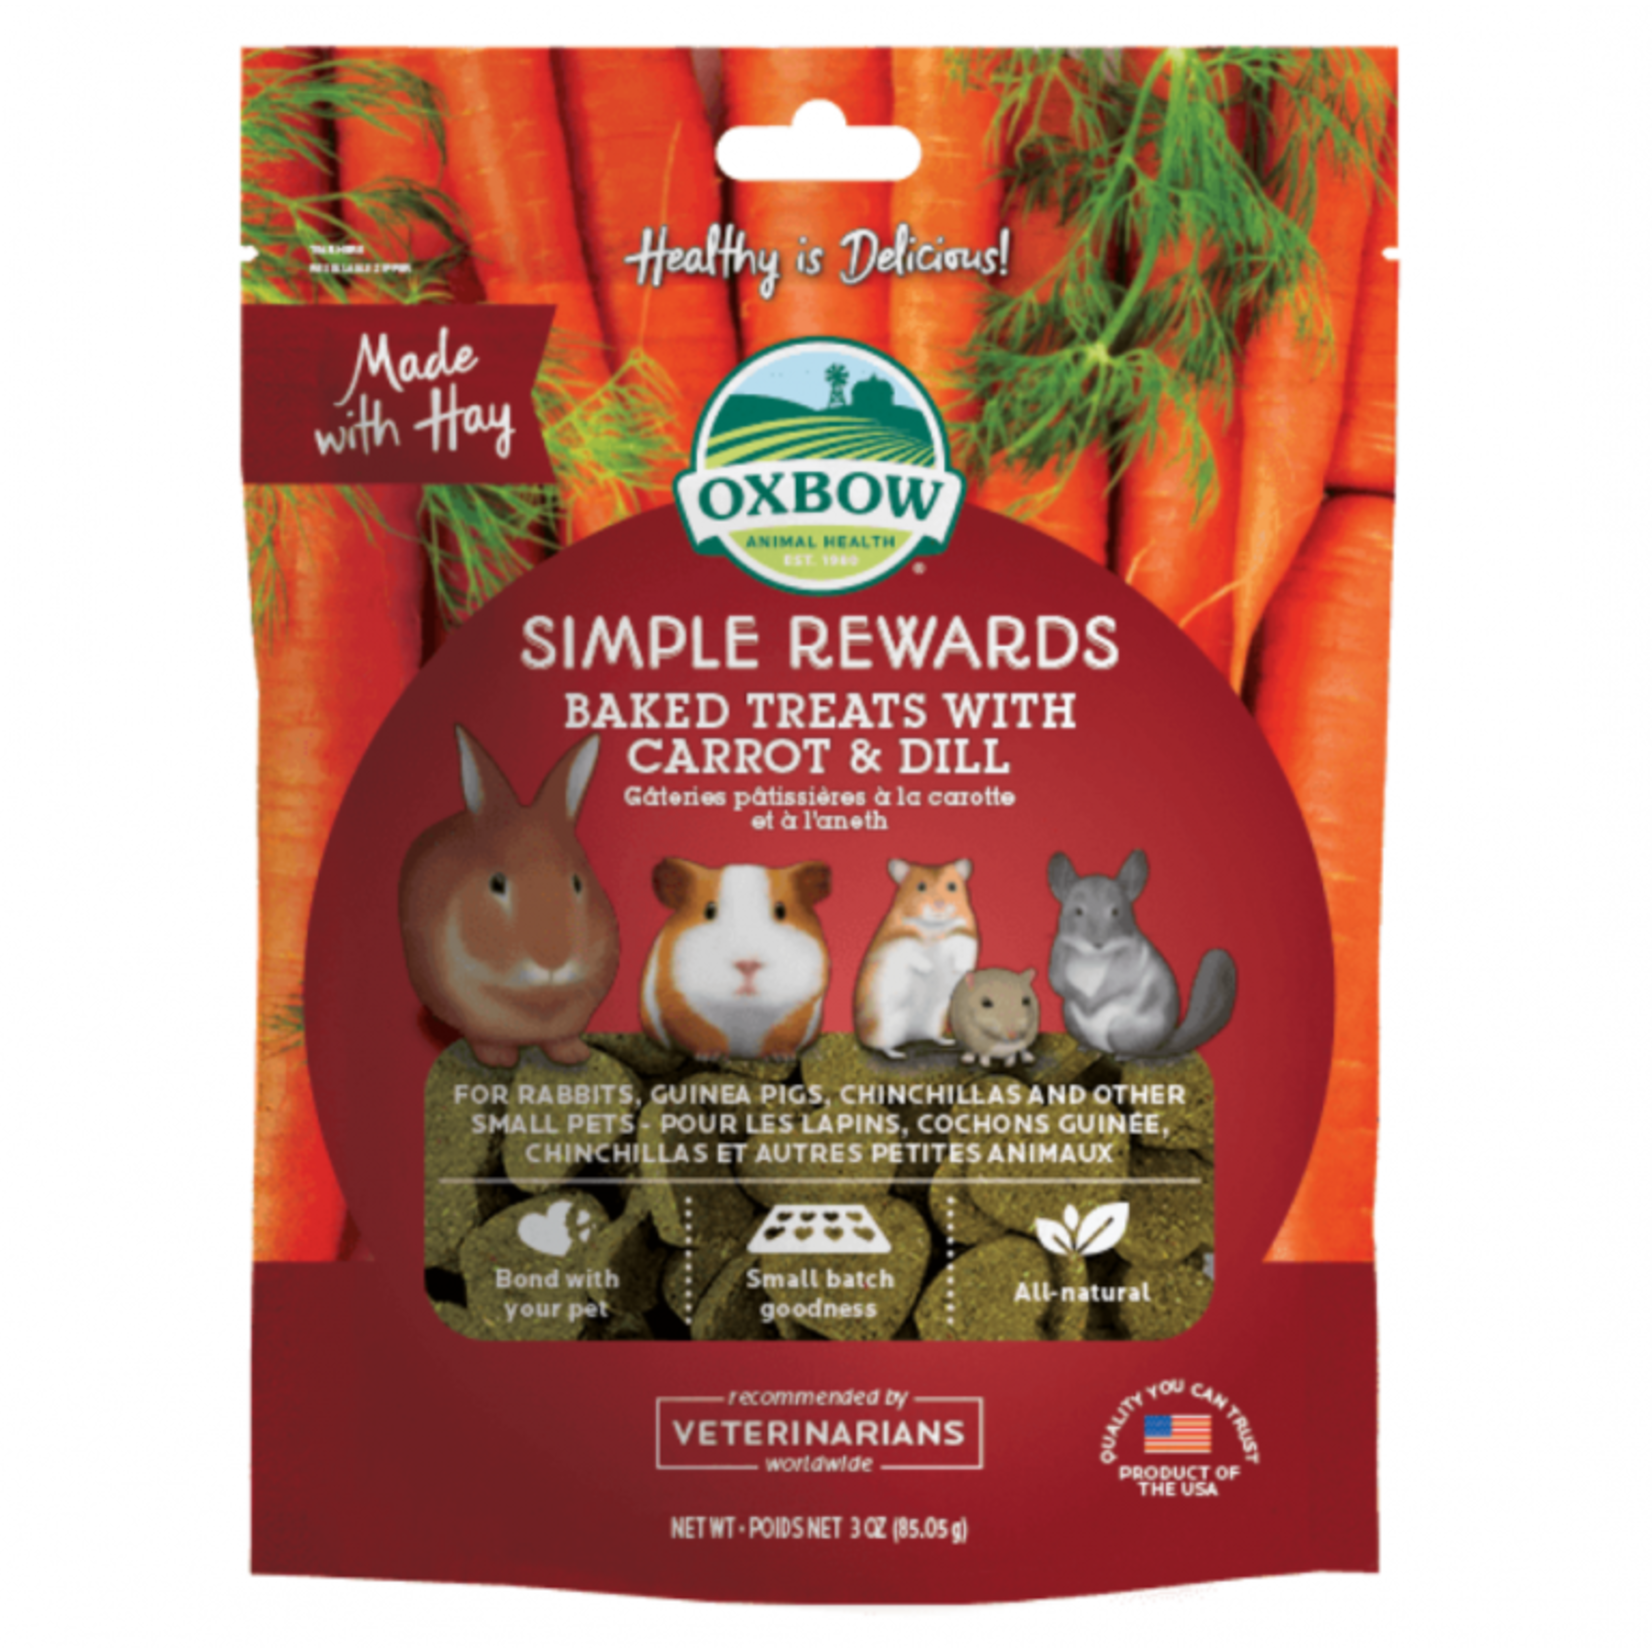 Oxbow Simple Rewards Baked Treats for Small Animals, Carrot & Dill, 85.5g